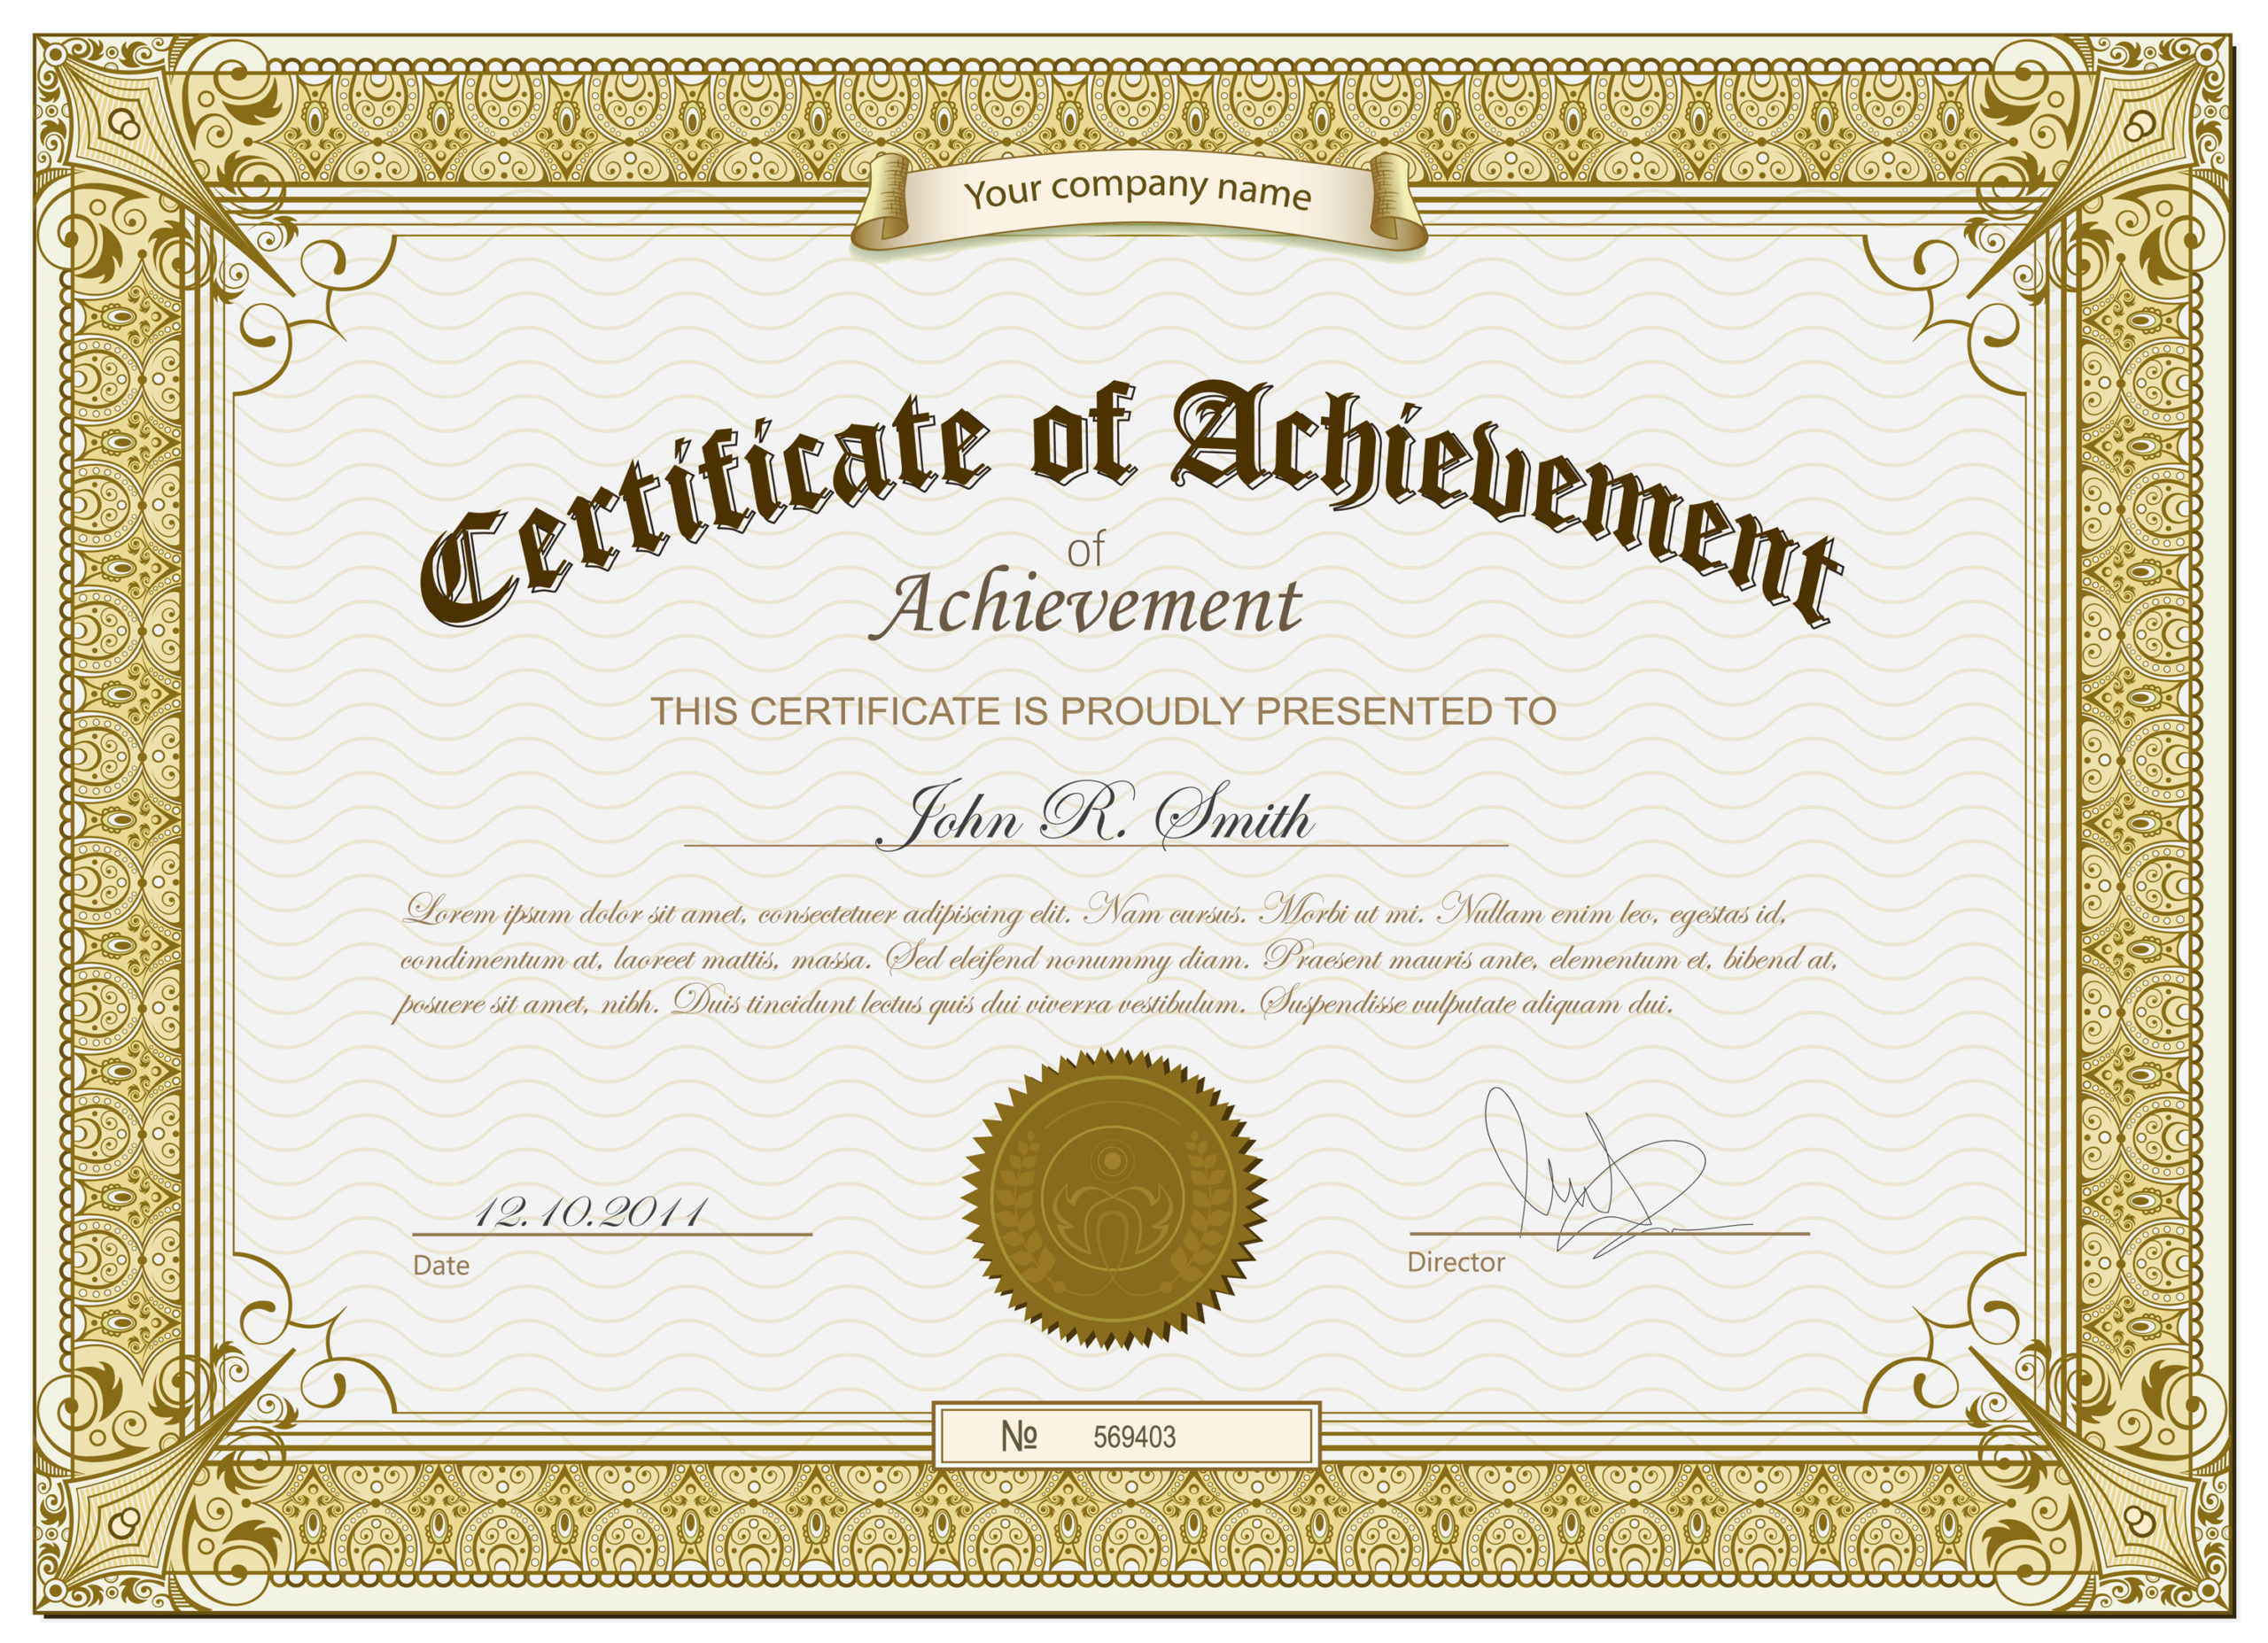 The ULTIMATE Guide to Online Certificates